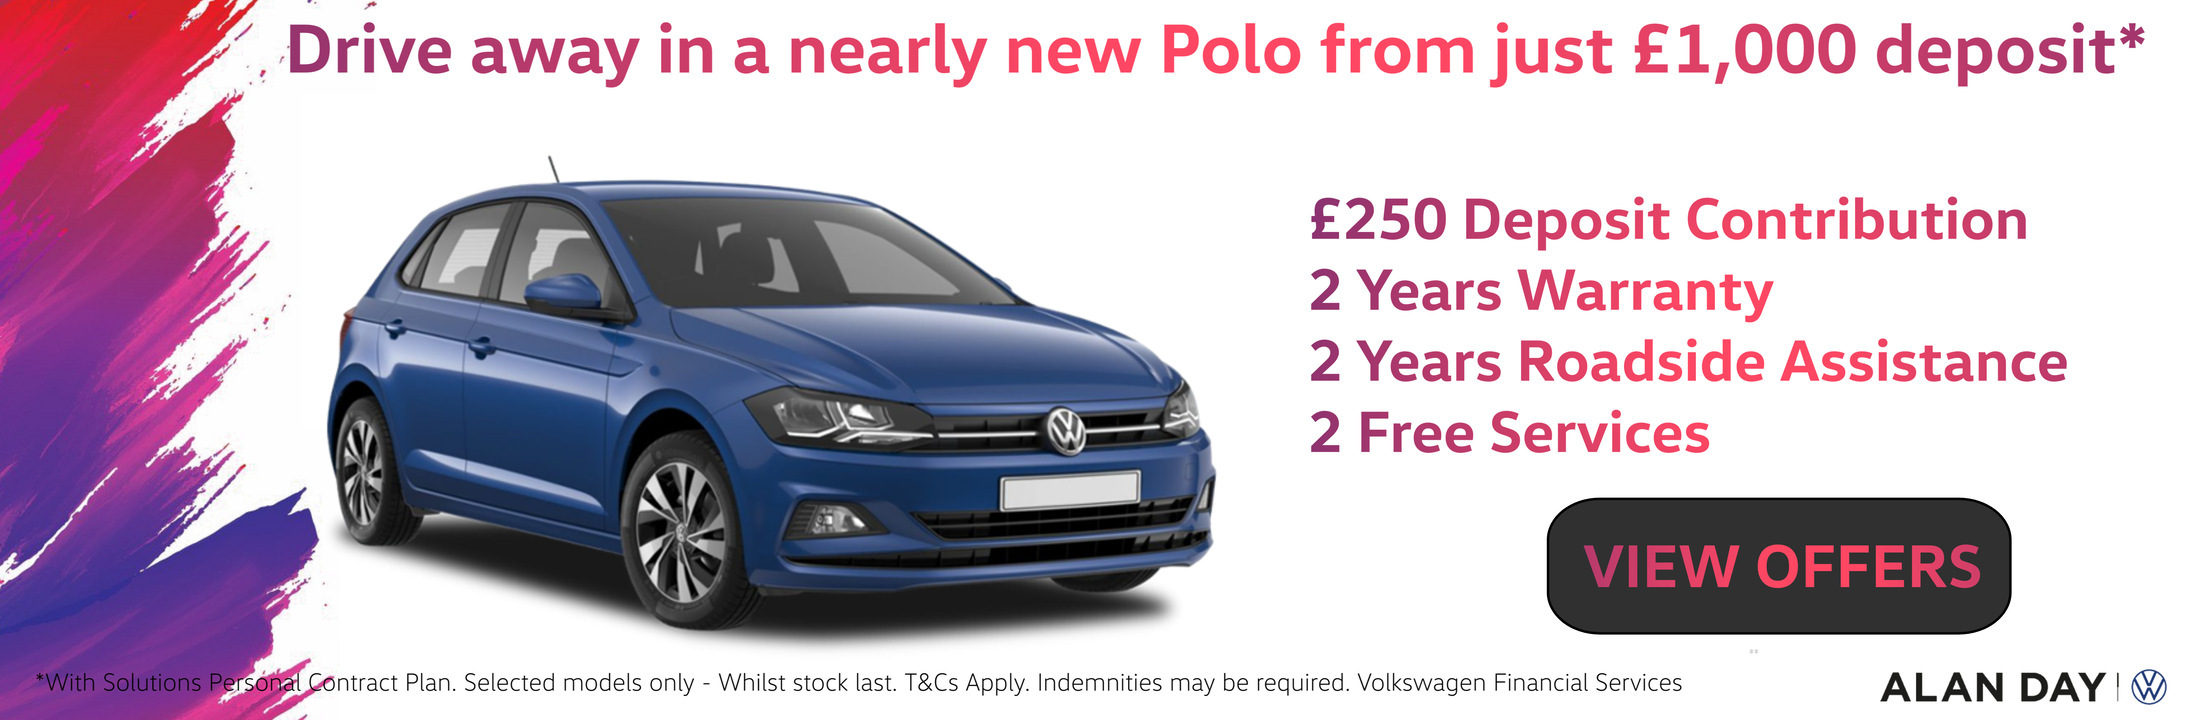 Used Polo Stock Clearance